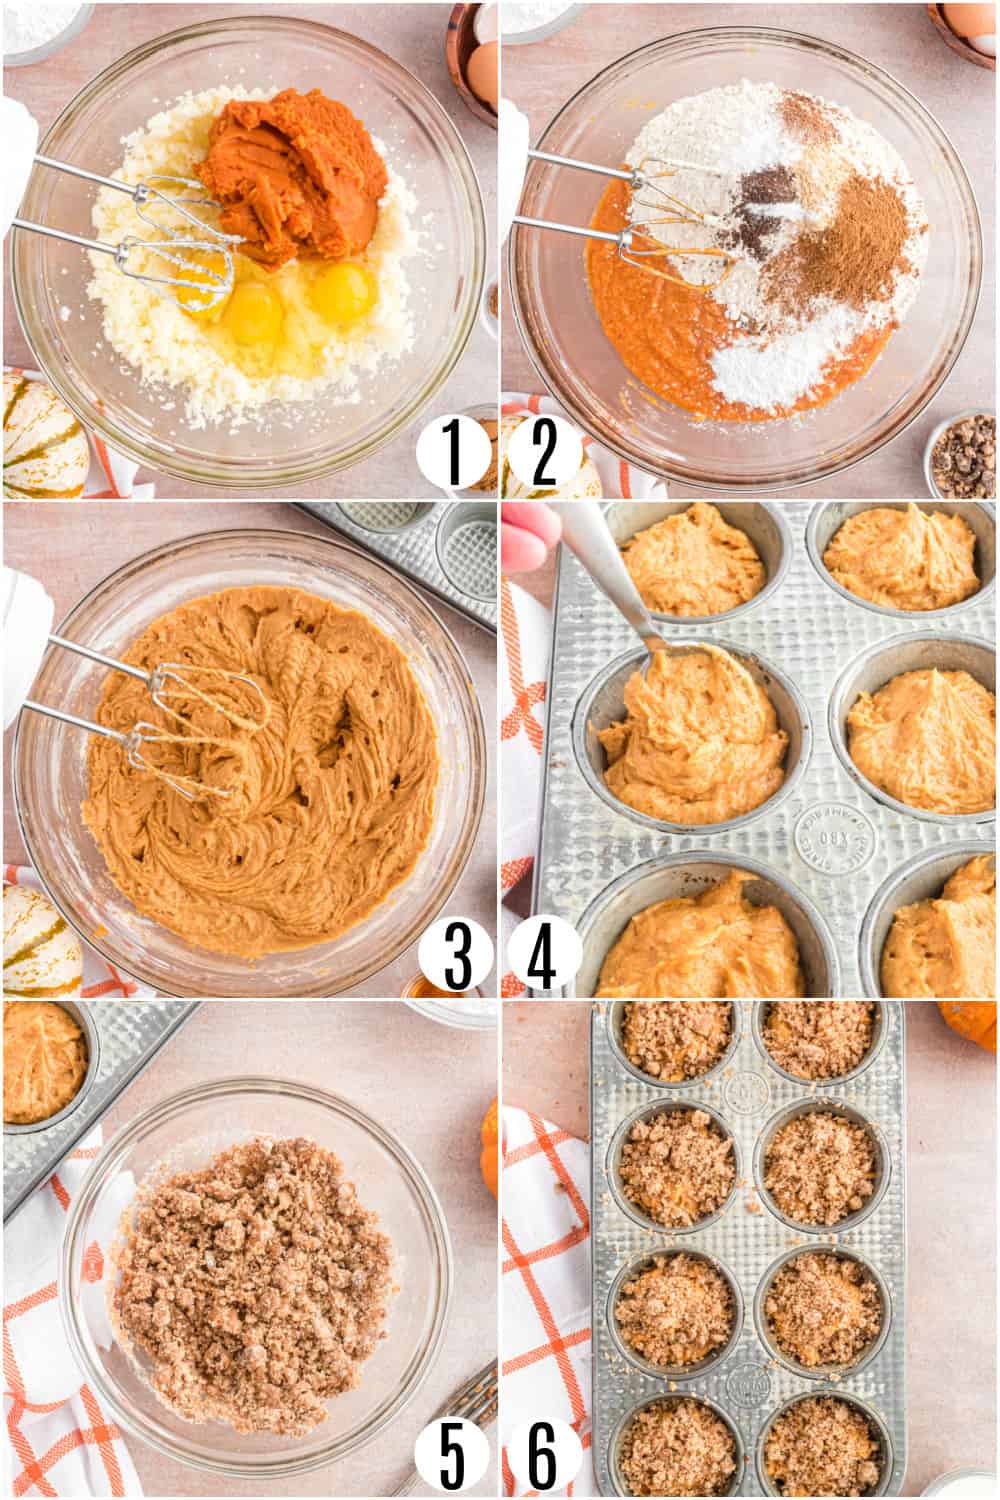 Step by step photos showing how to make pumpkin muffins with maple icing.